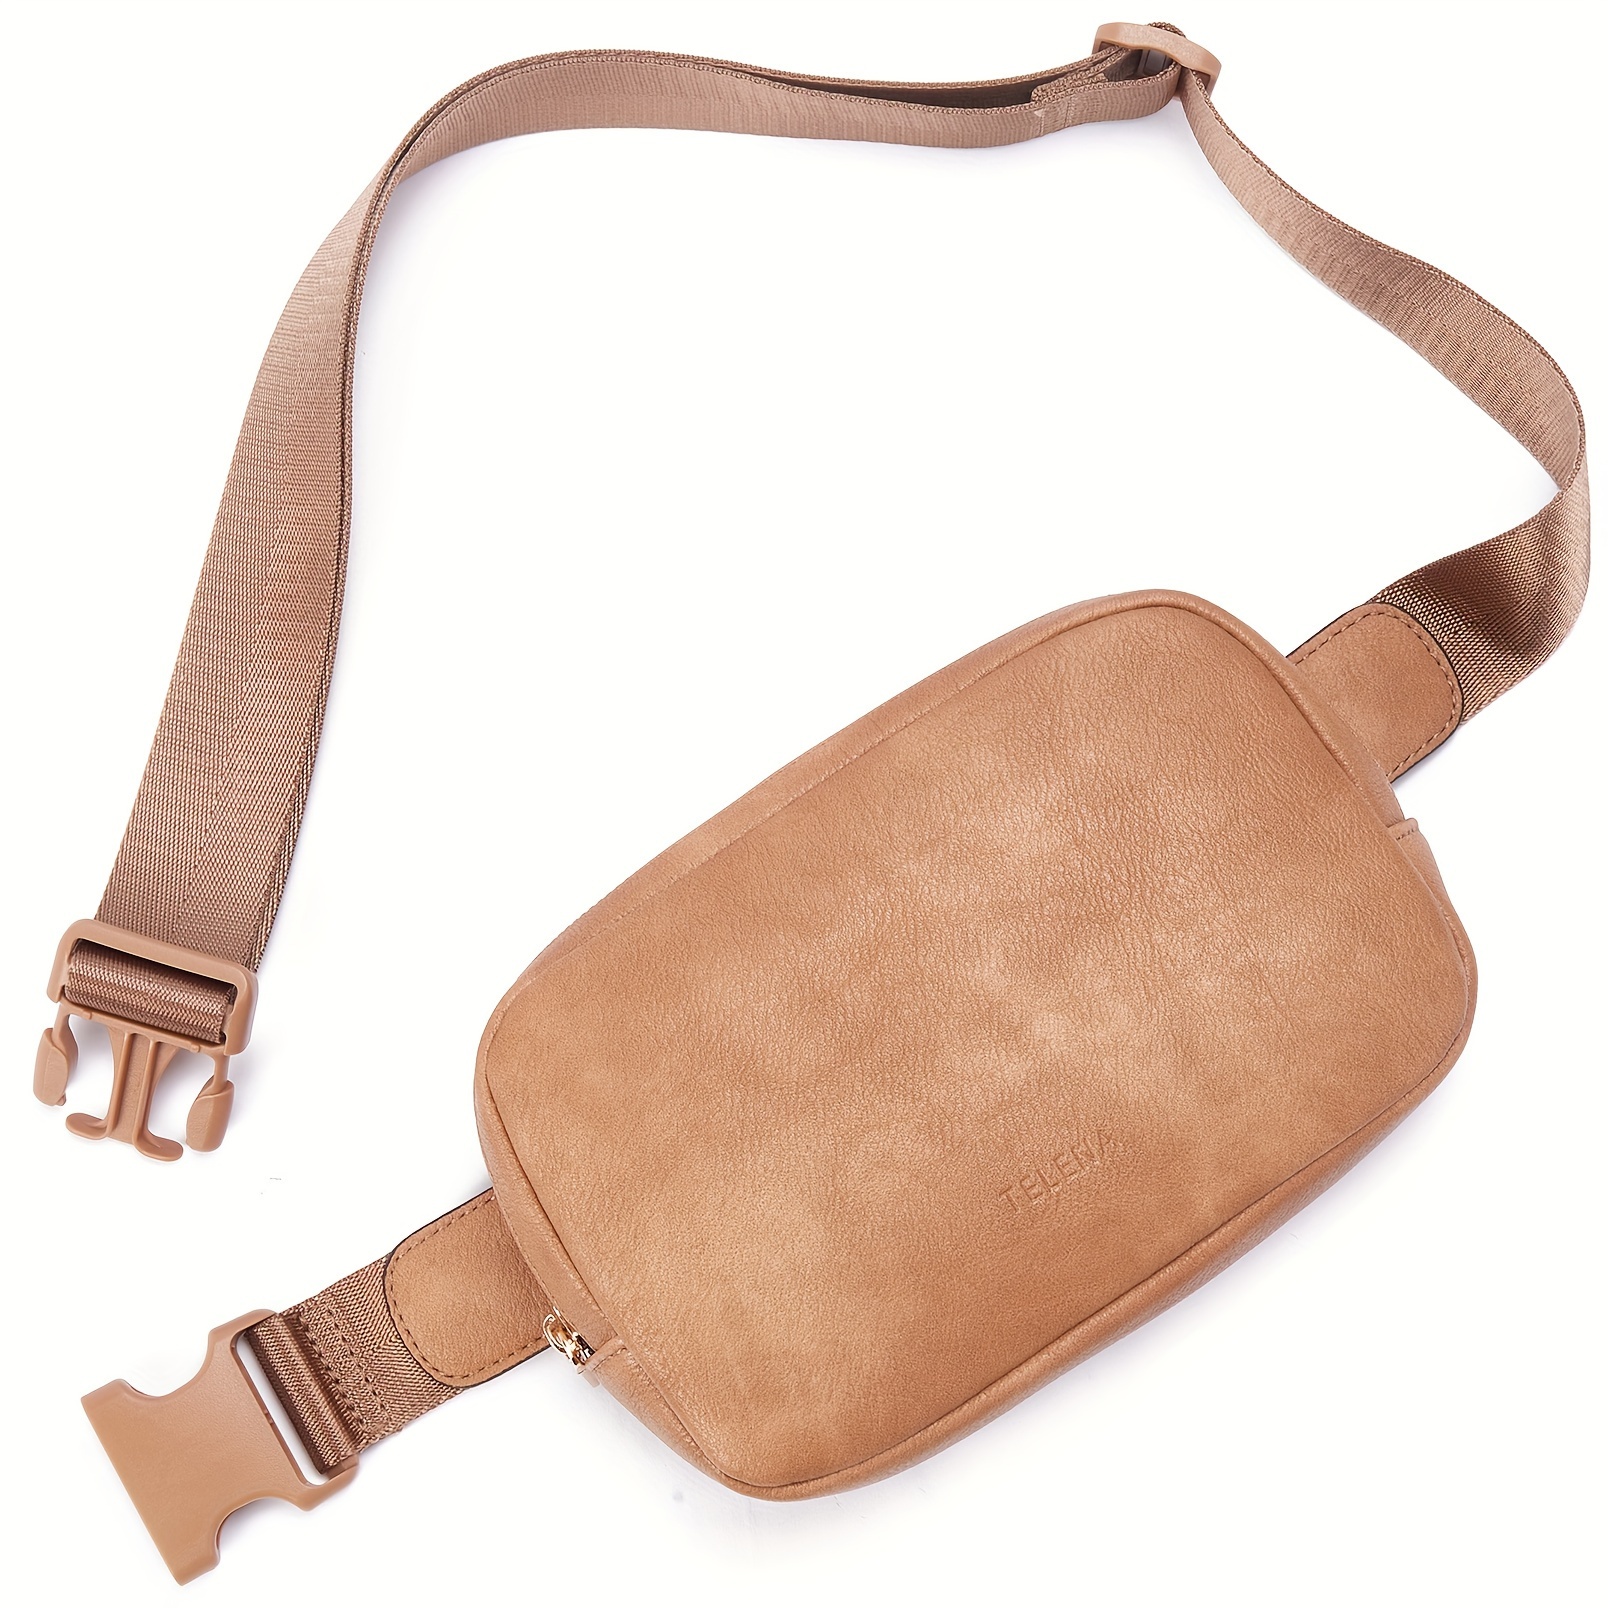 

Belt Bag For Women, Pu Leather Fanny Pack Crossbody Bags, Waist Bag With Adjustable Strap